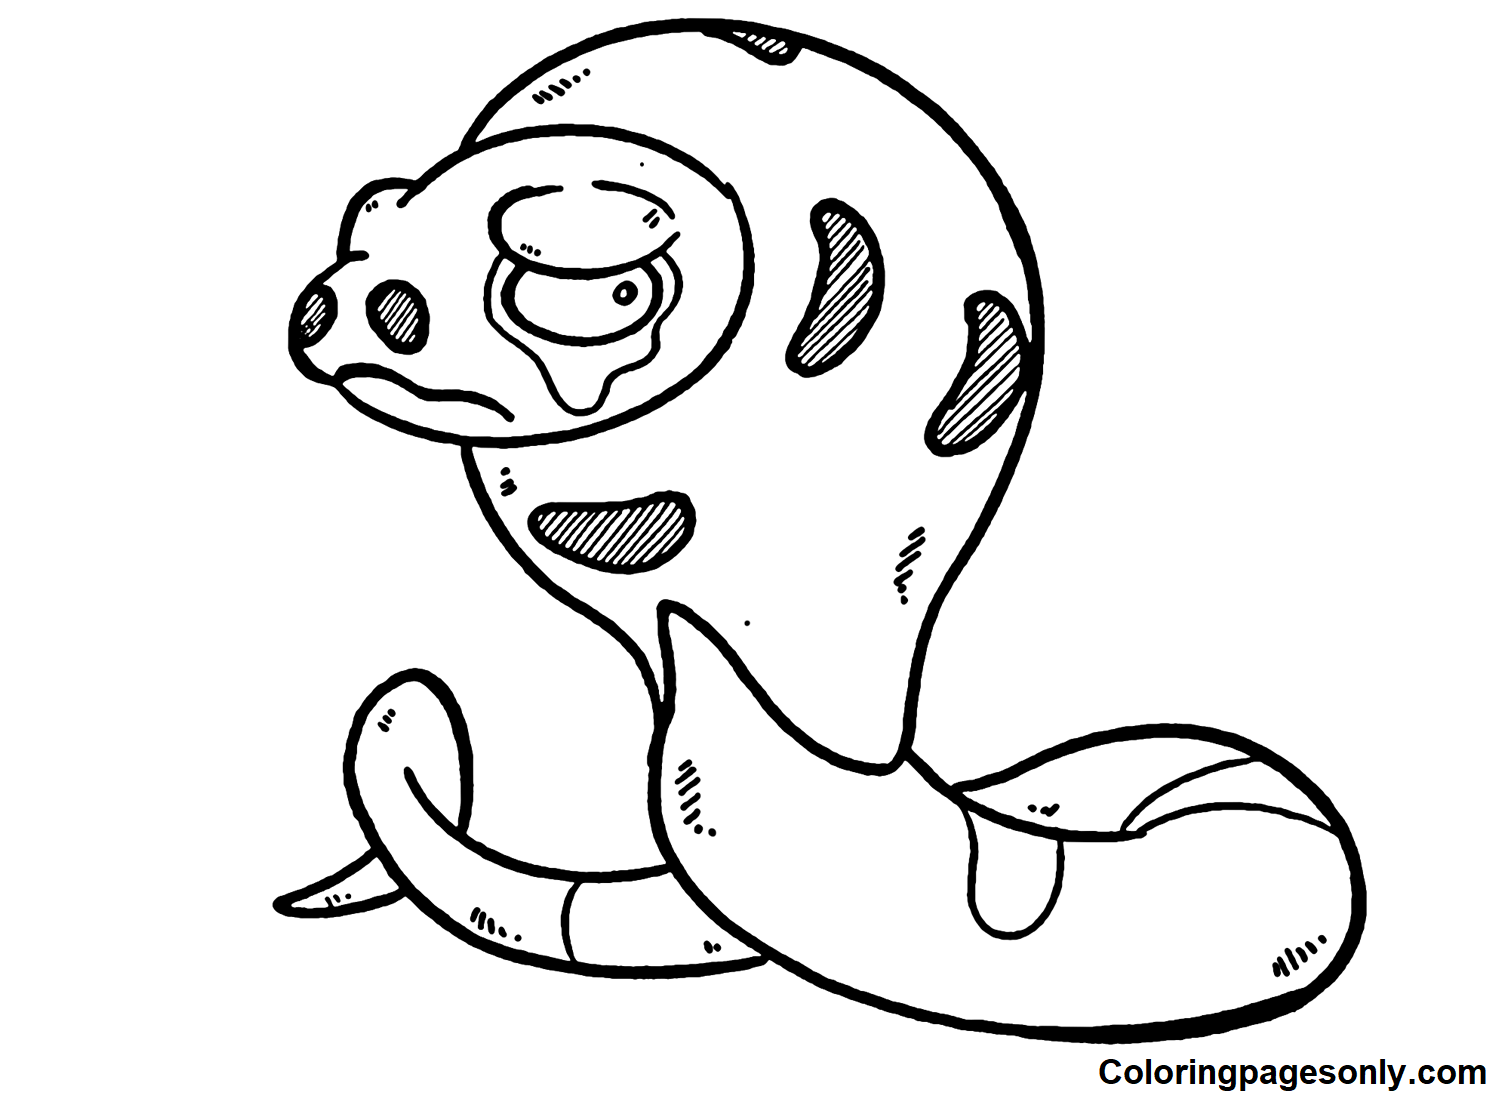 Pokemon Silicobra Images Coloring Page